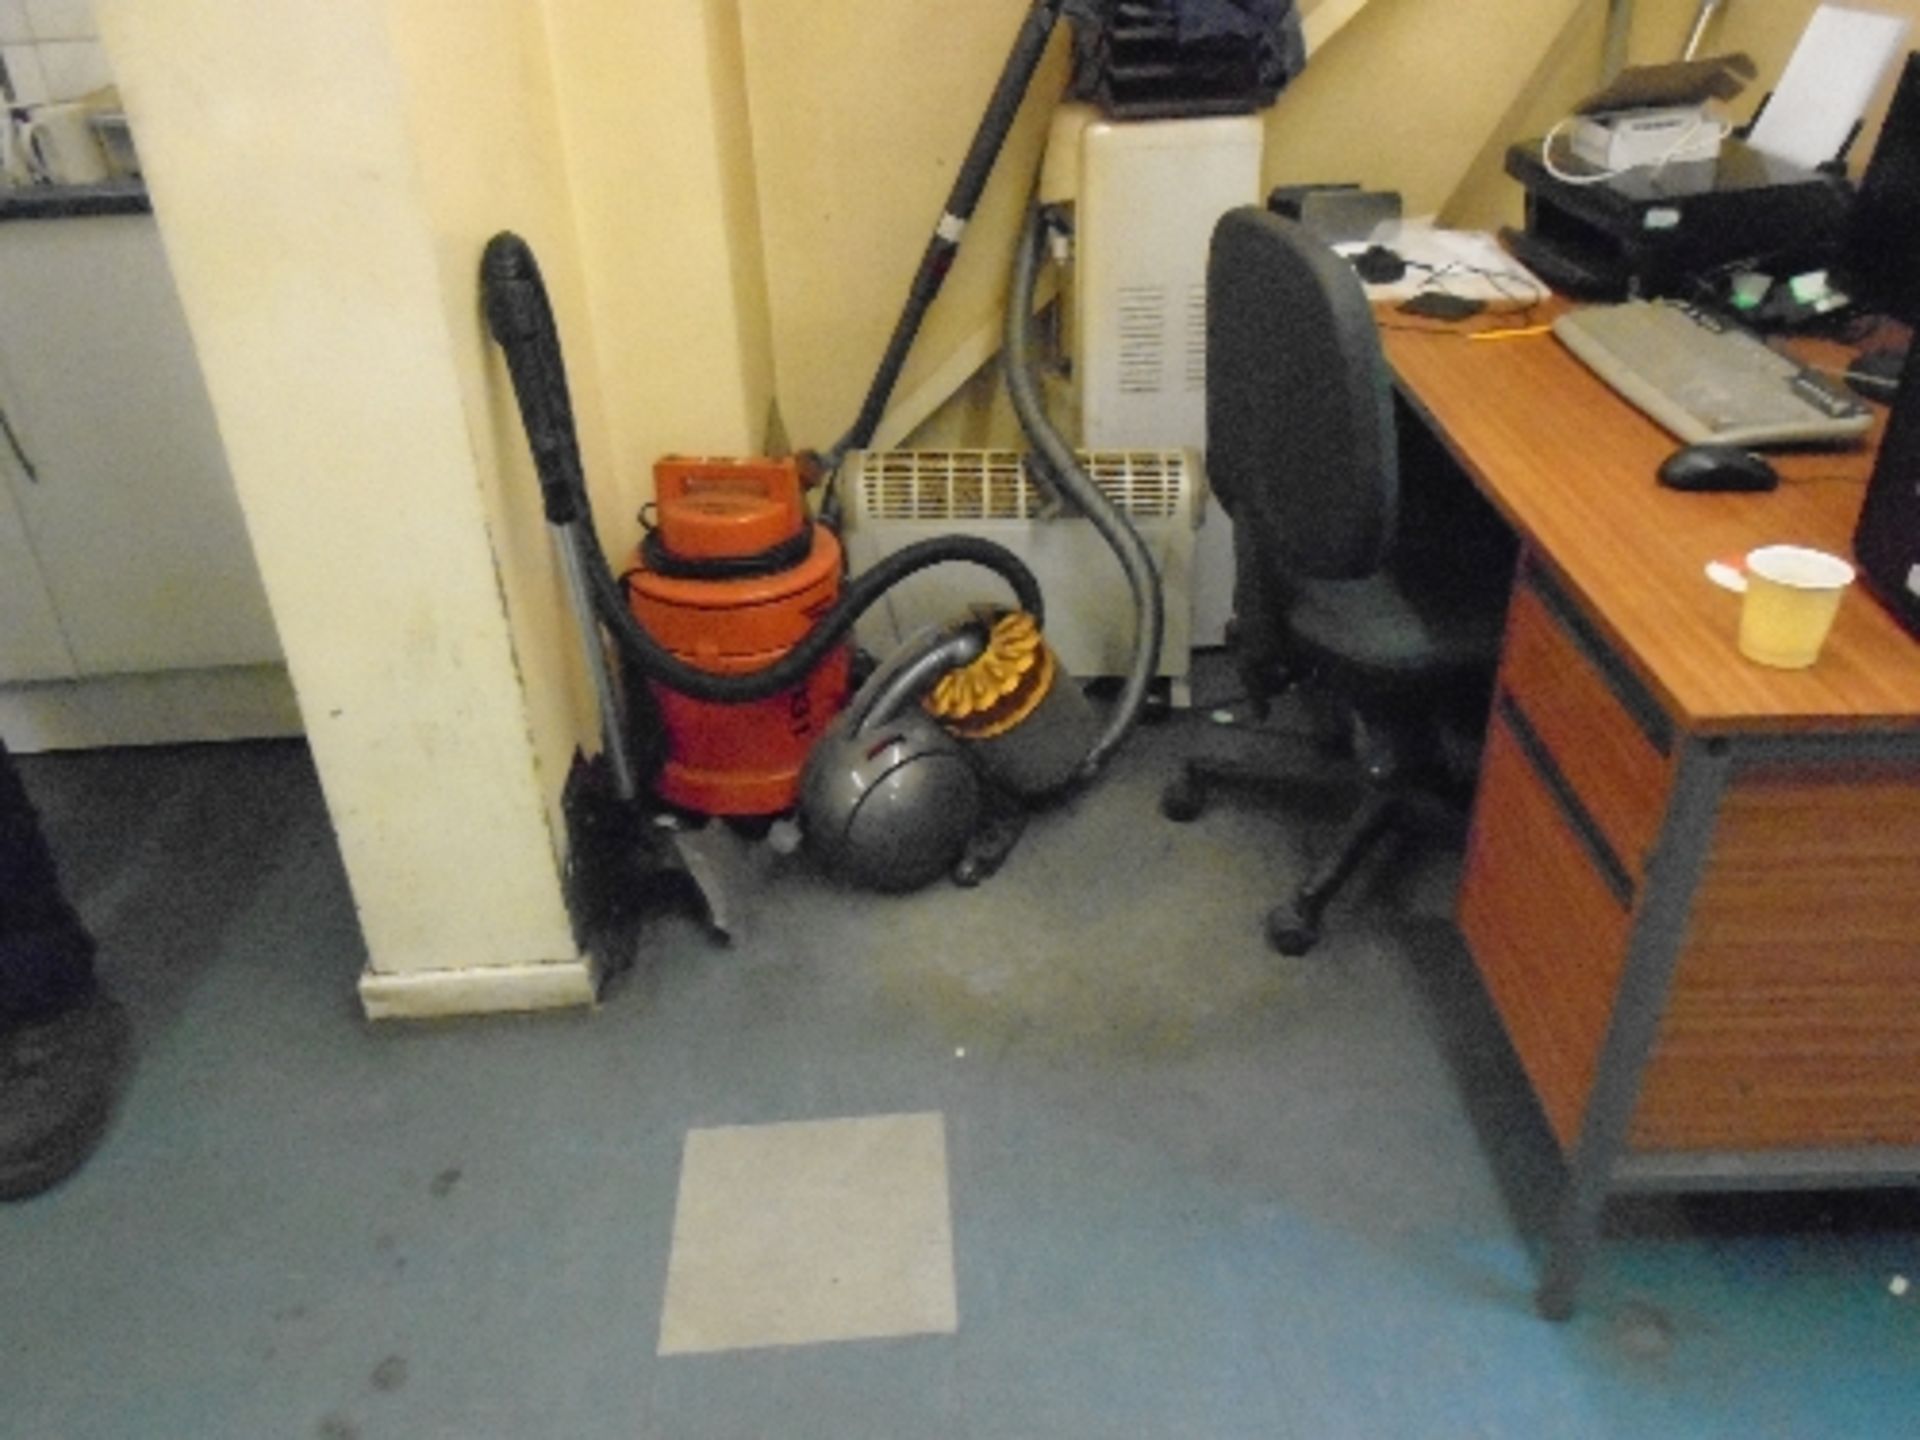 Remaining contents to canteen area - tables, chairs, vacuum cleaners, heaters, mugs, - Image 3 of 4